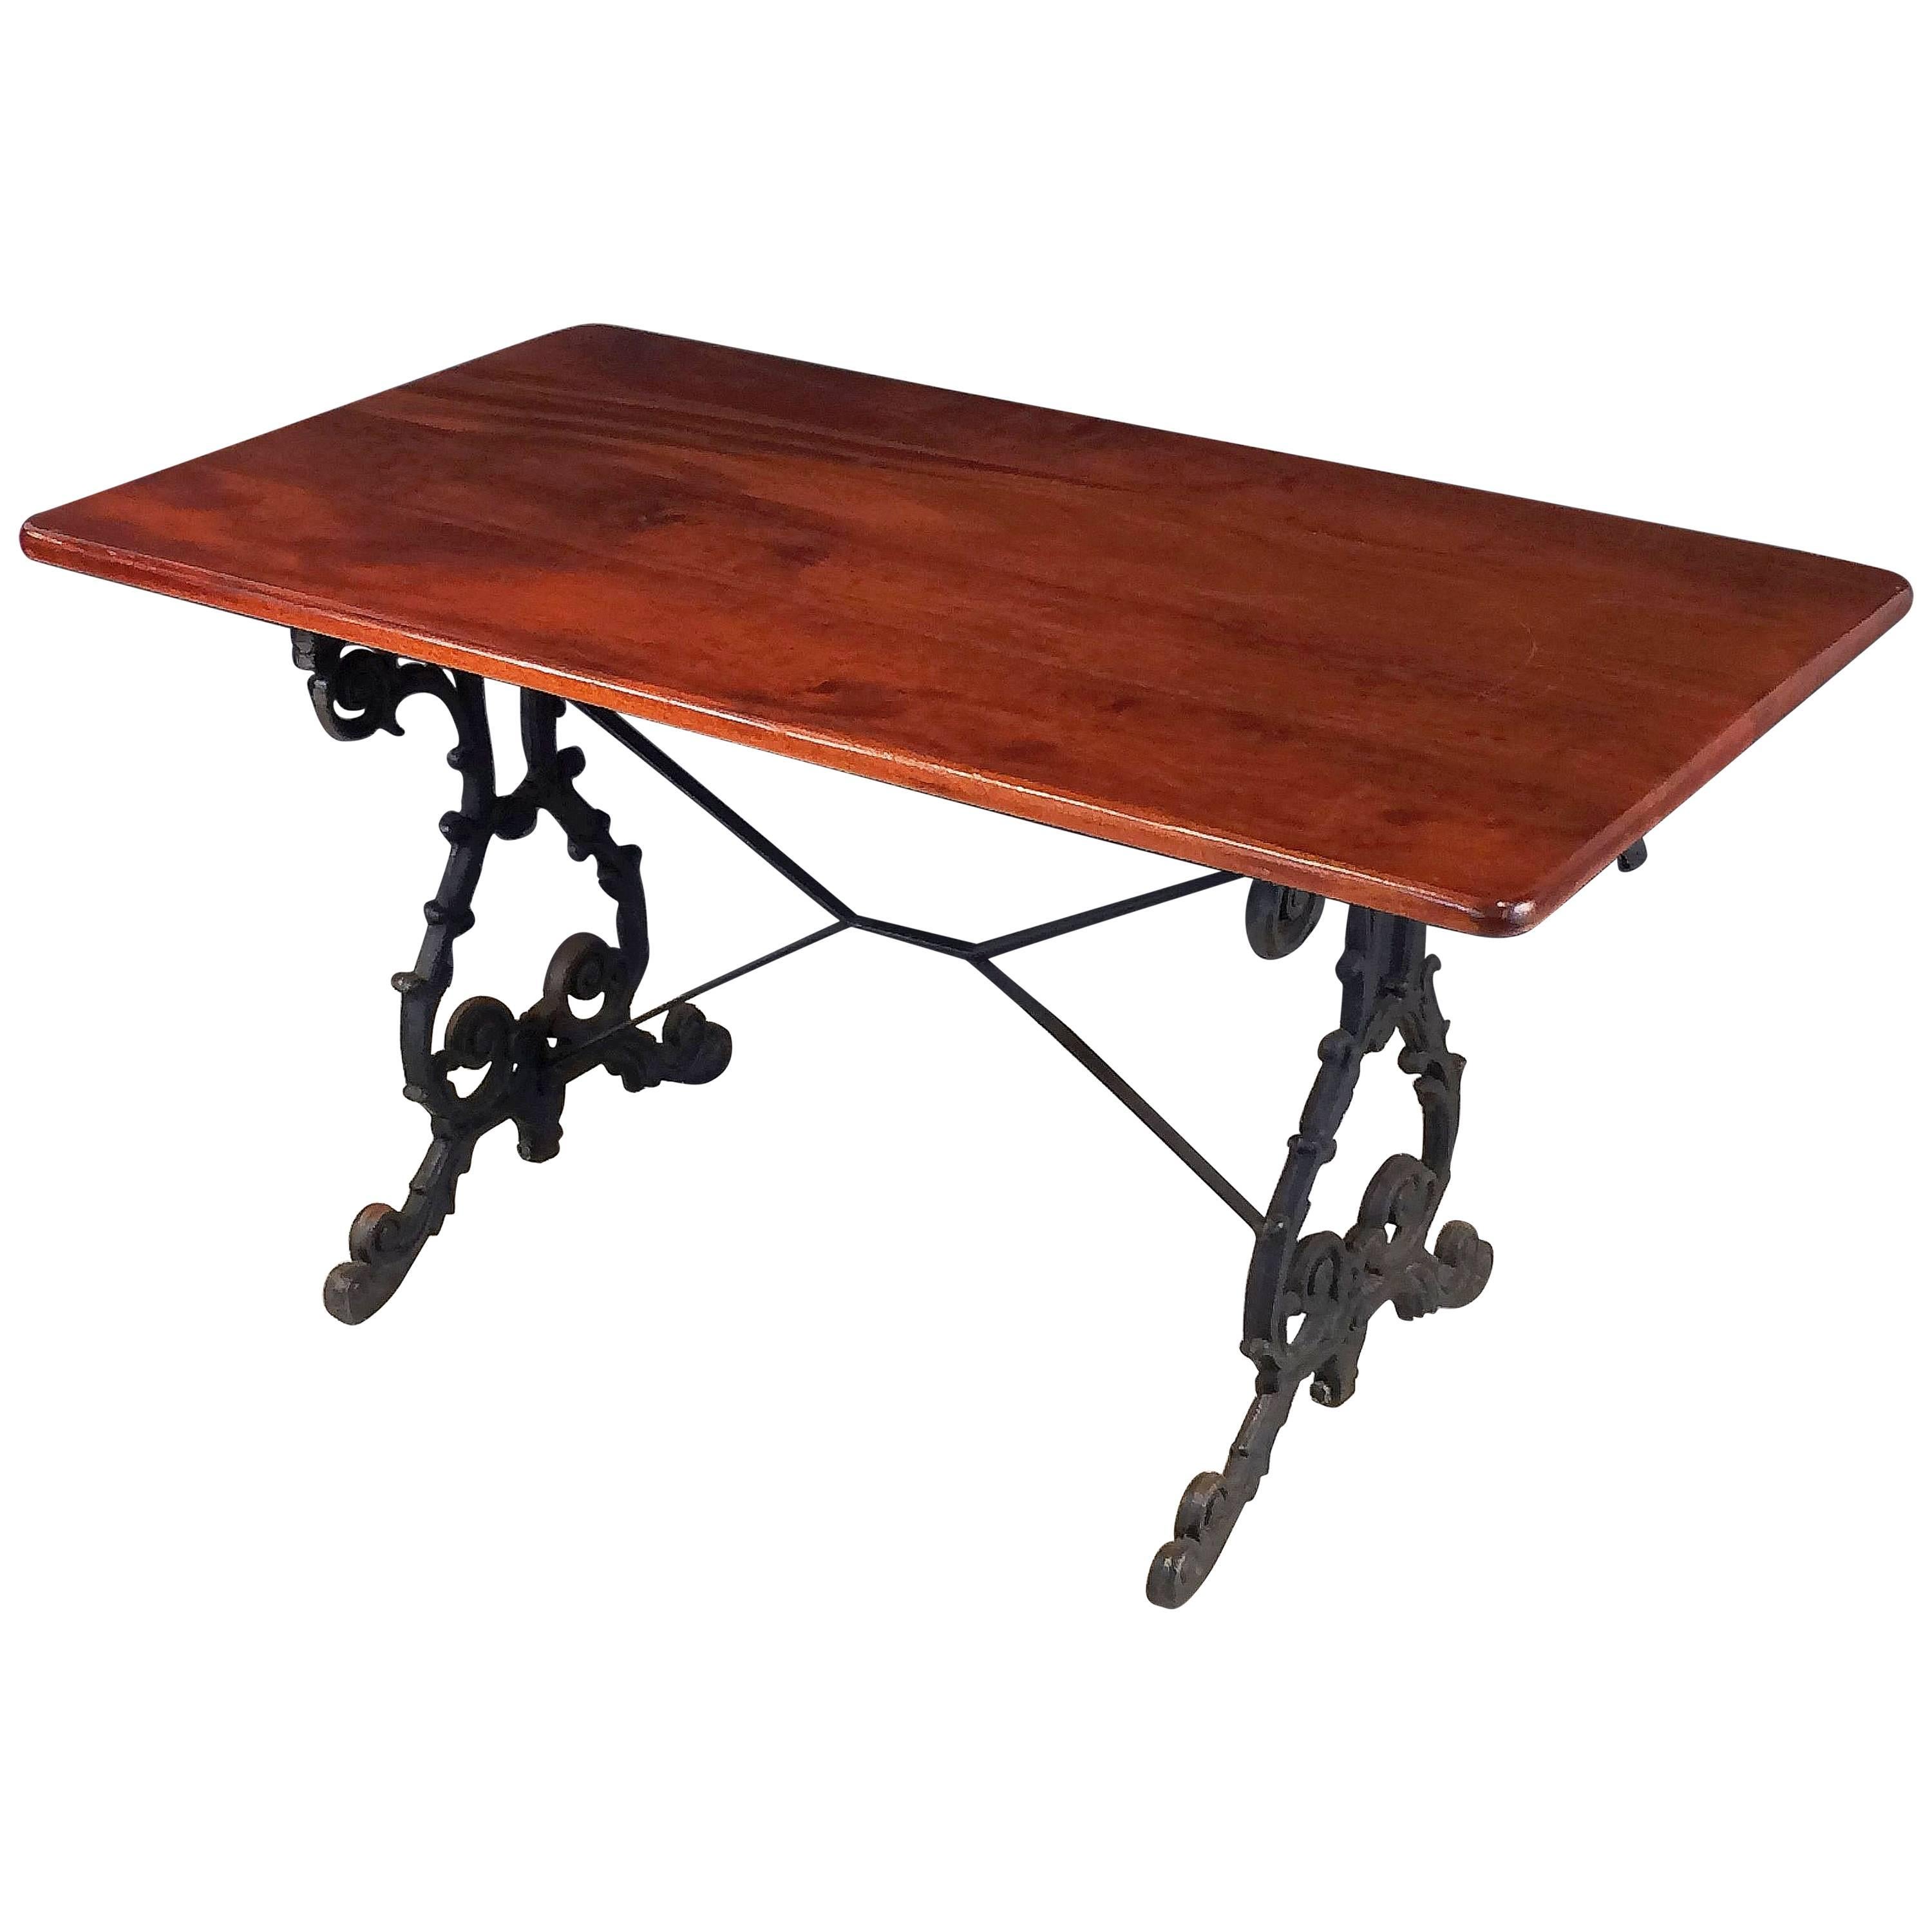 English Bistro or Pub Table of Cast Iron with Wooden Top